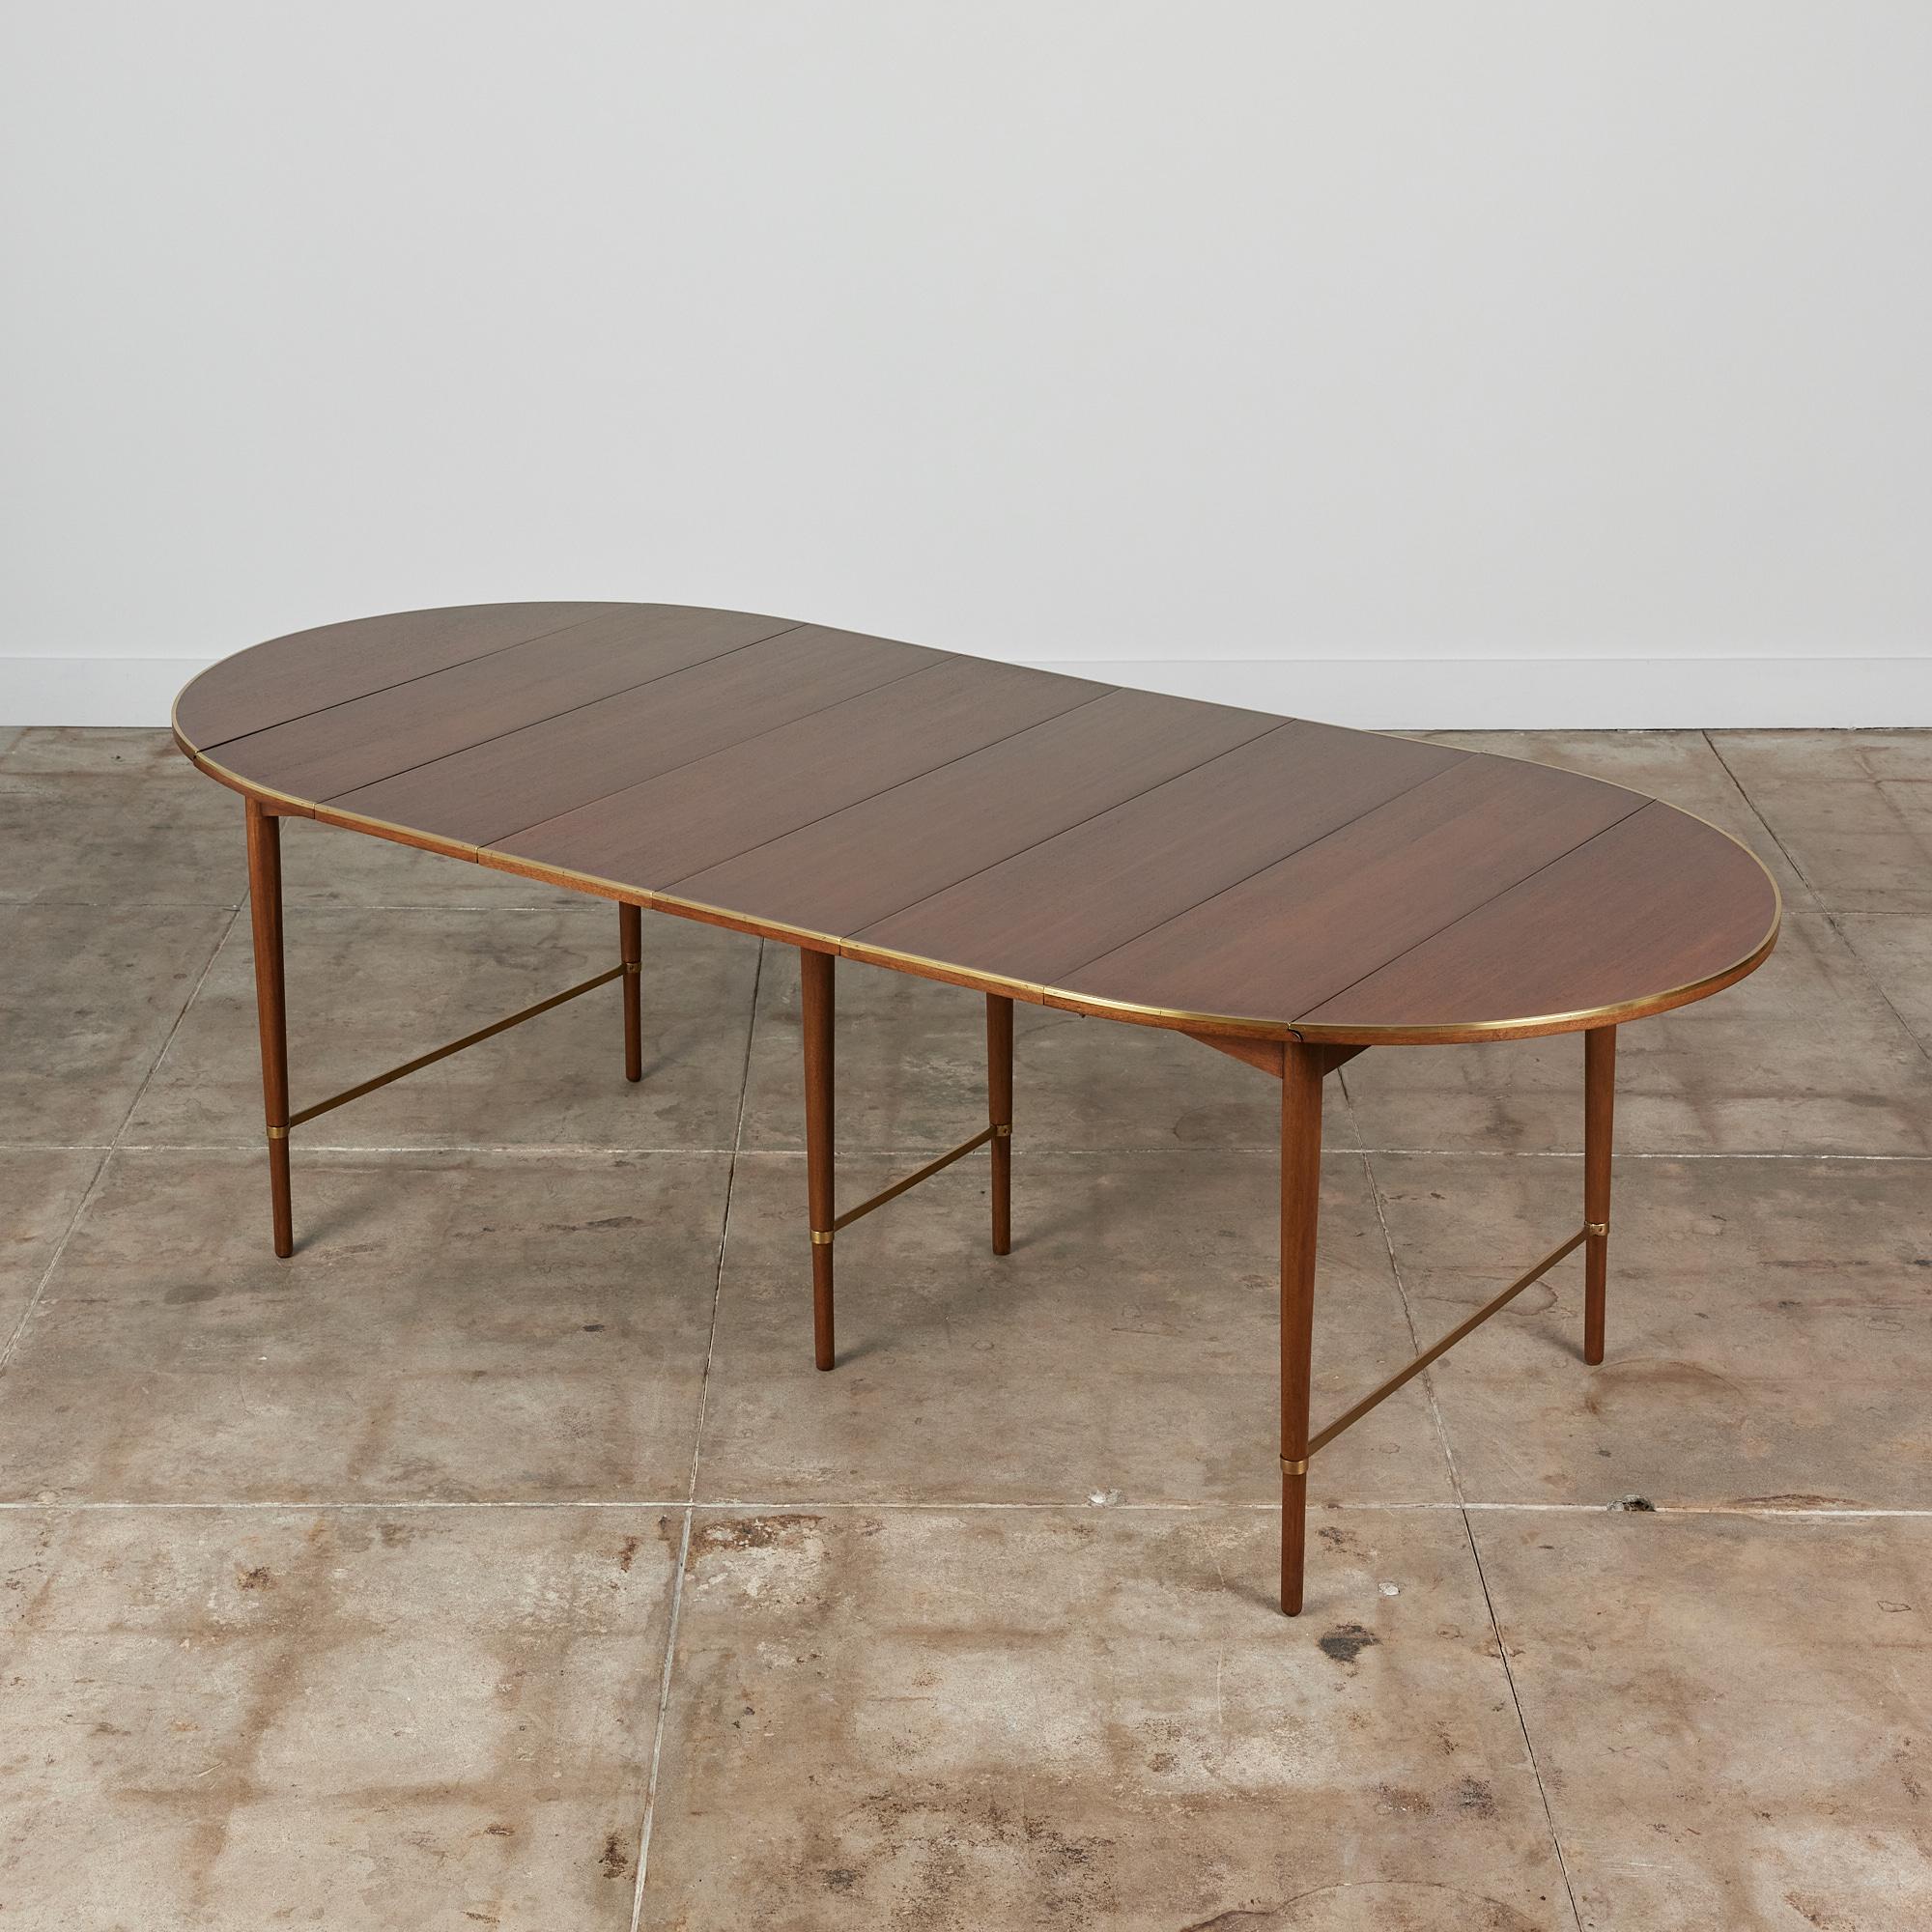 Designed by Paul McCobb, circa 1950s, USA for H. Sacks & Sons “Connoisseur” line. This walnut table features an oval table top when fully extended. The edge of the table showcases a beautiful brass trimming. The tables six tapered legs are supported